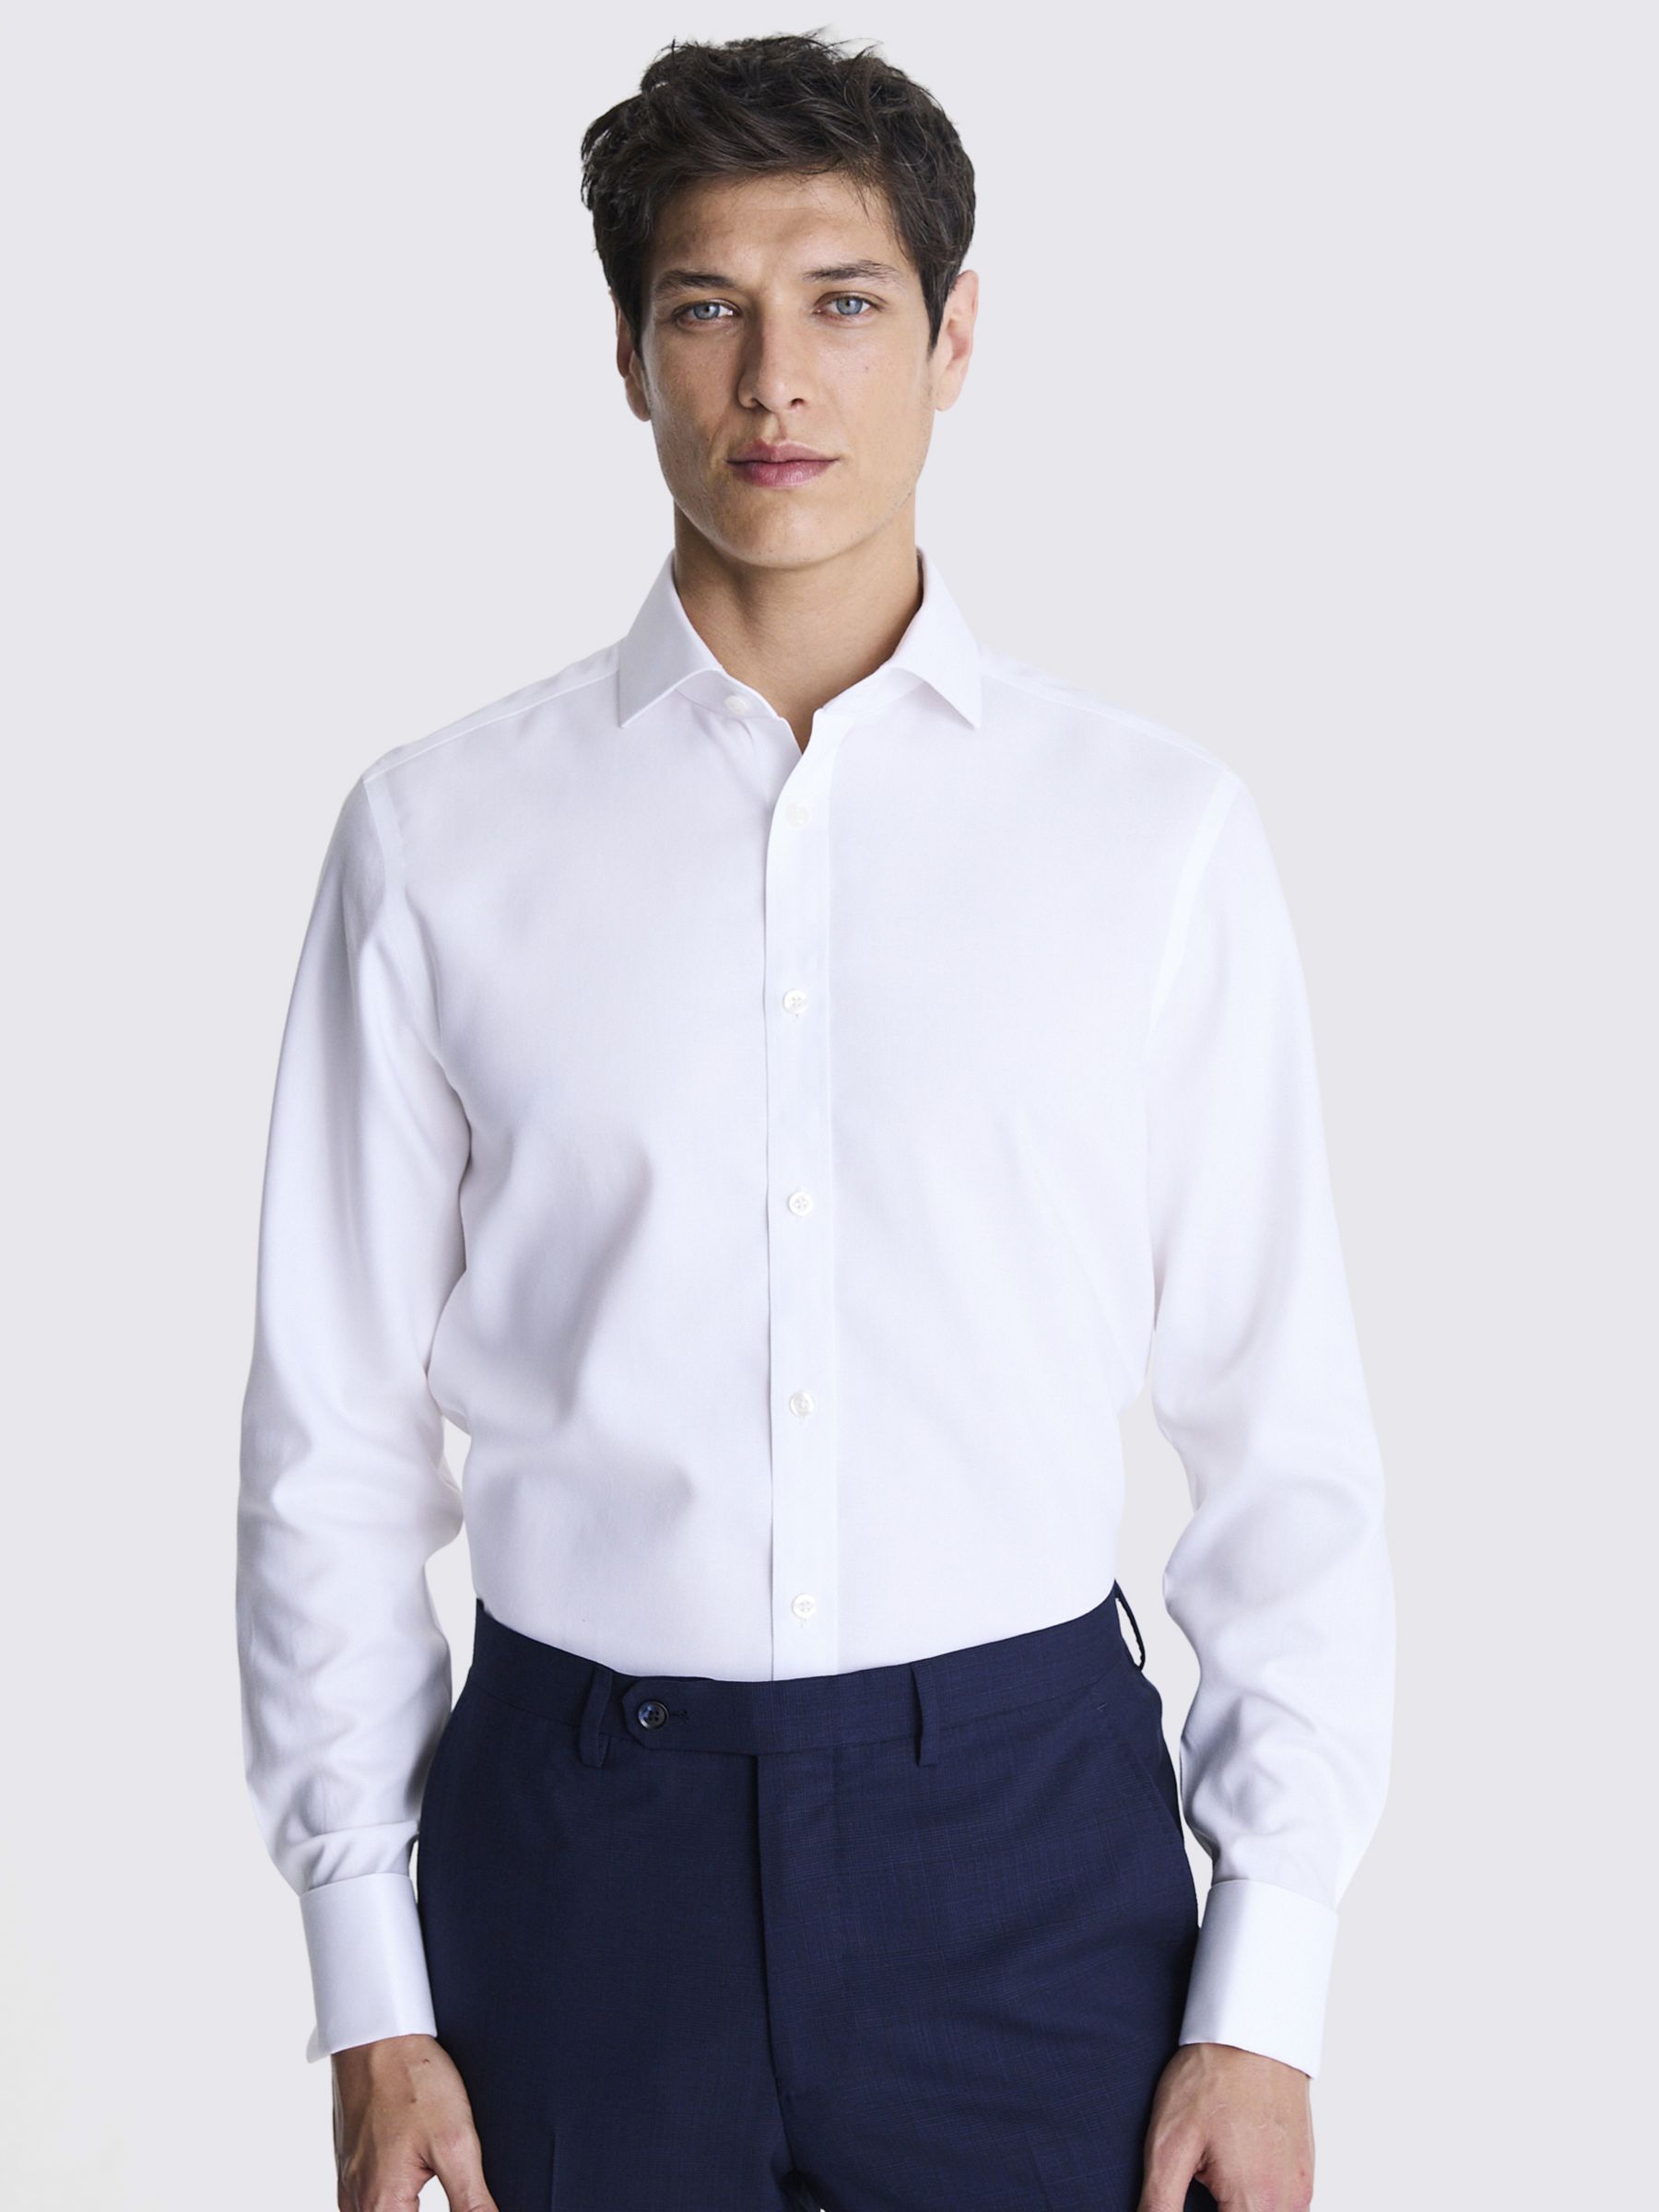 Moss Tailored Fit Royal Oxford Double Cuff Non-Iron Shirt, White, 15.5